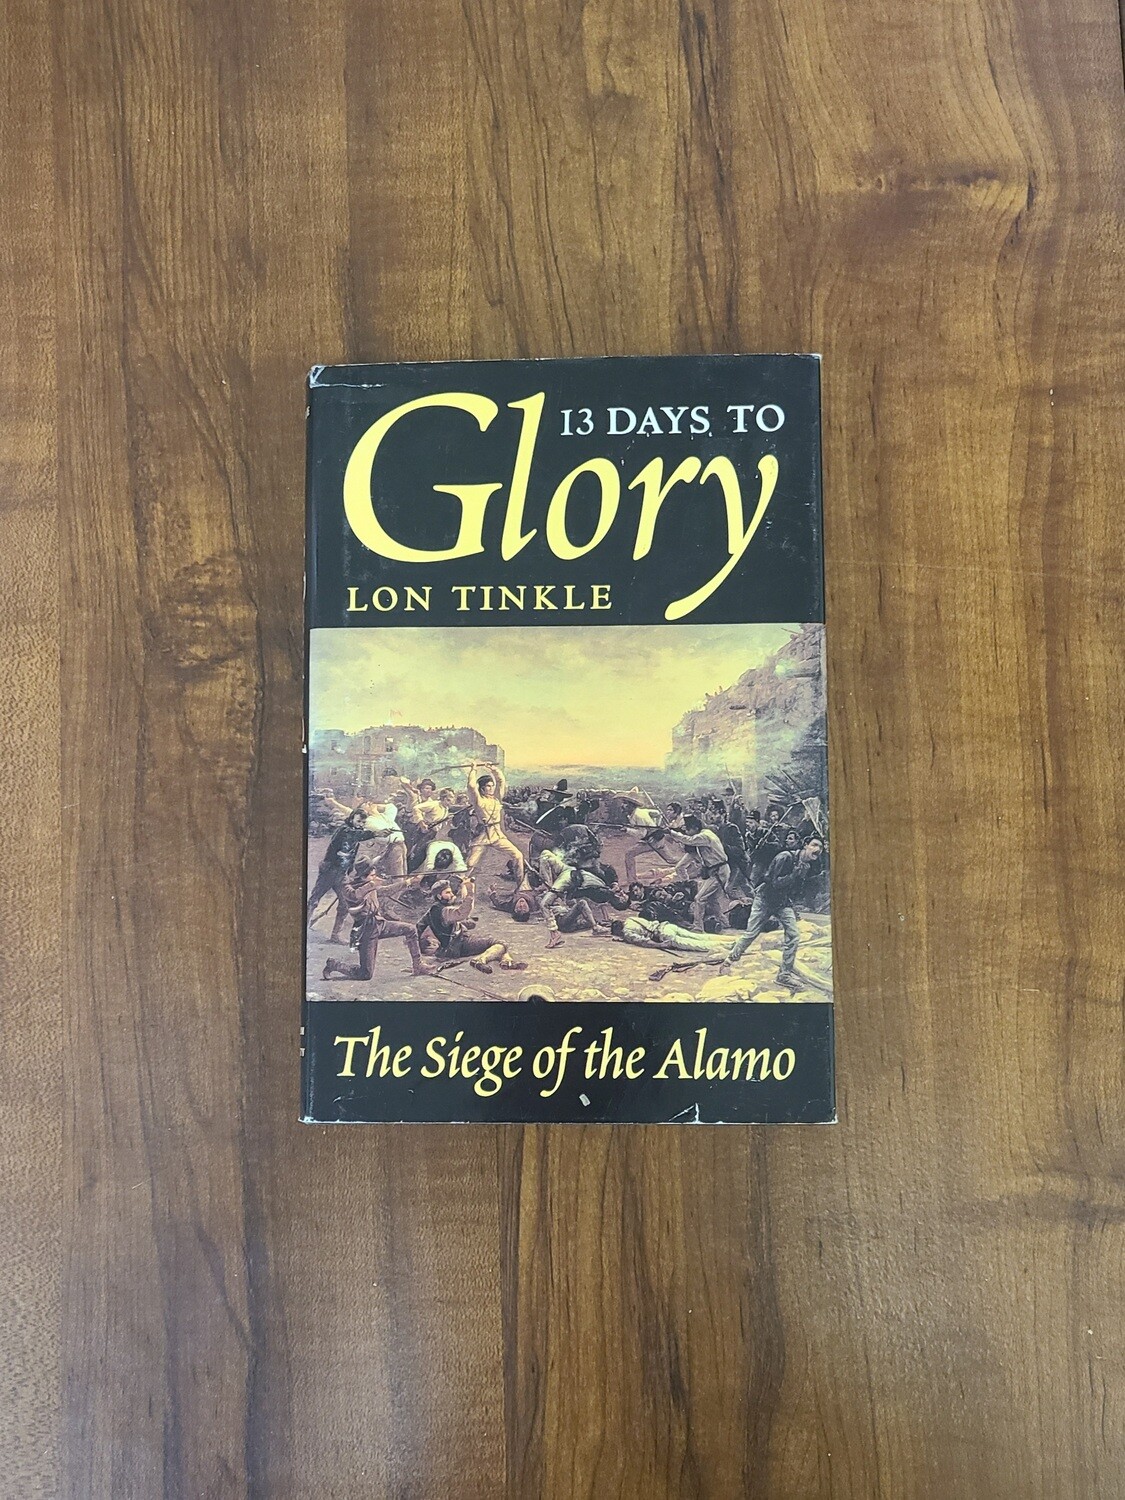 13 Days To Glory: The Siege of the Alamo by Lon Tinkle